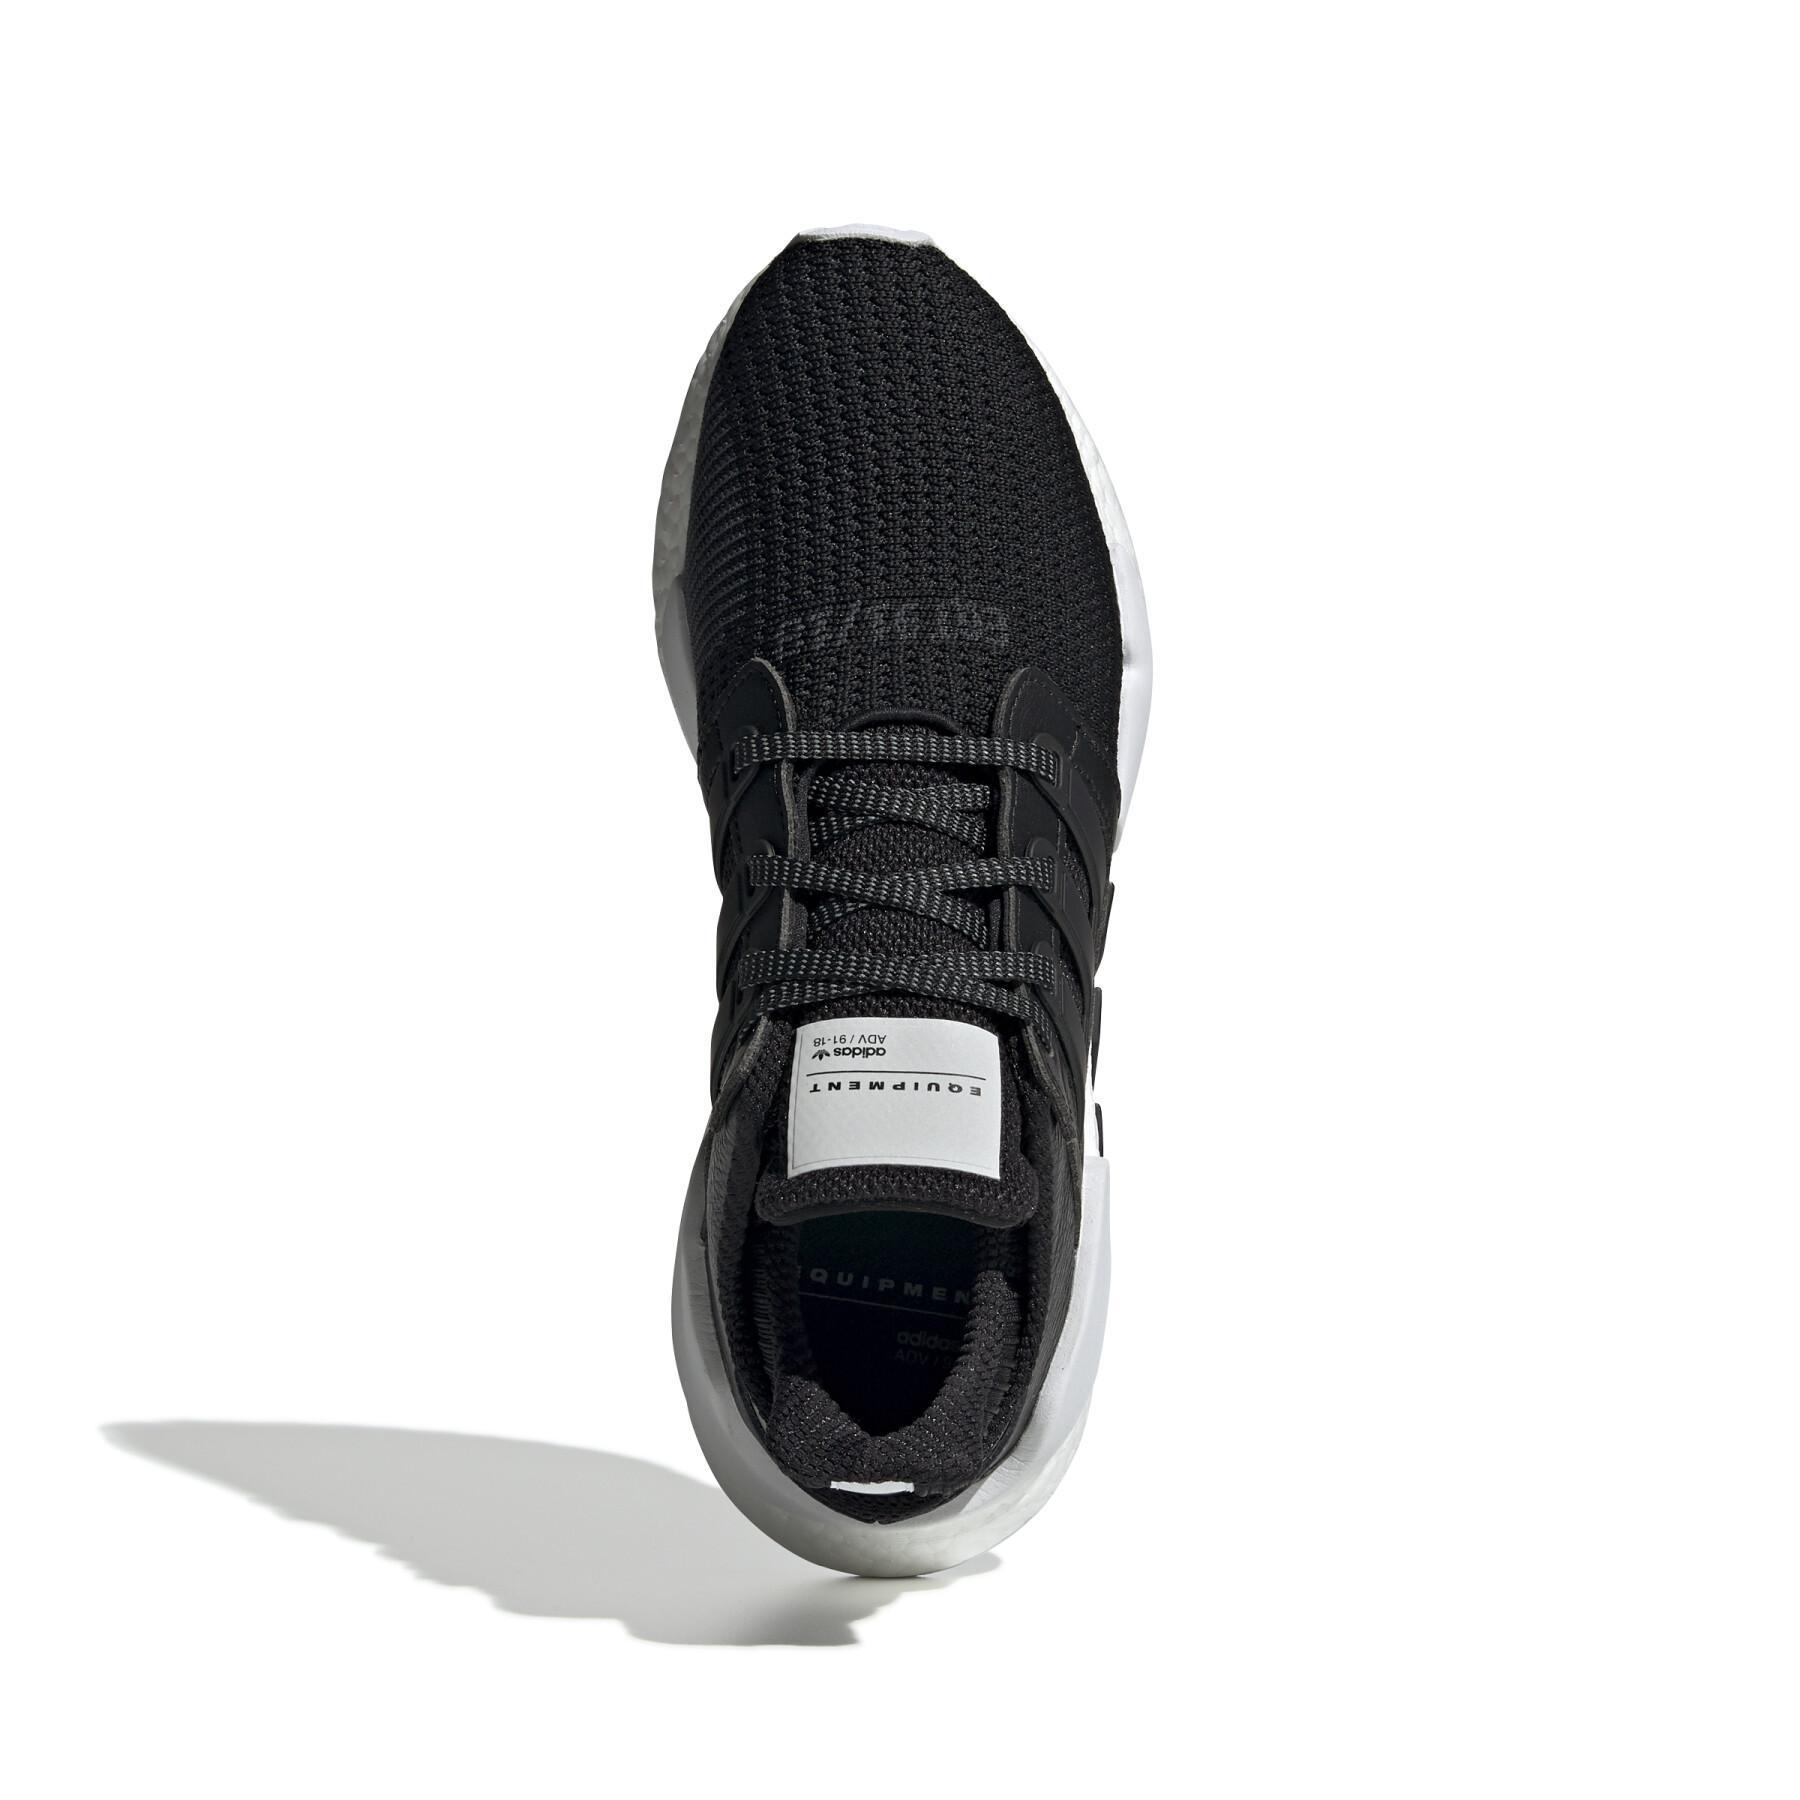 Sneakers adidas EQT Support - Shoes - Man - Lifestyle